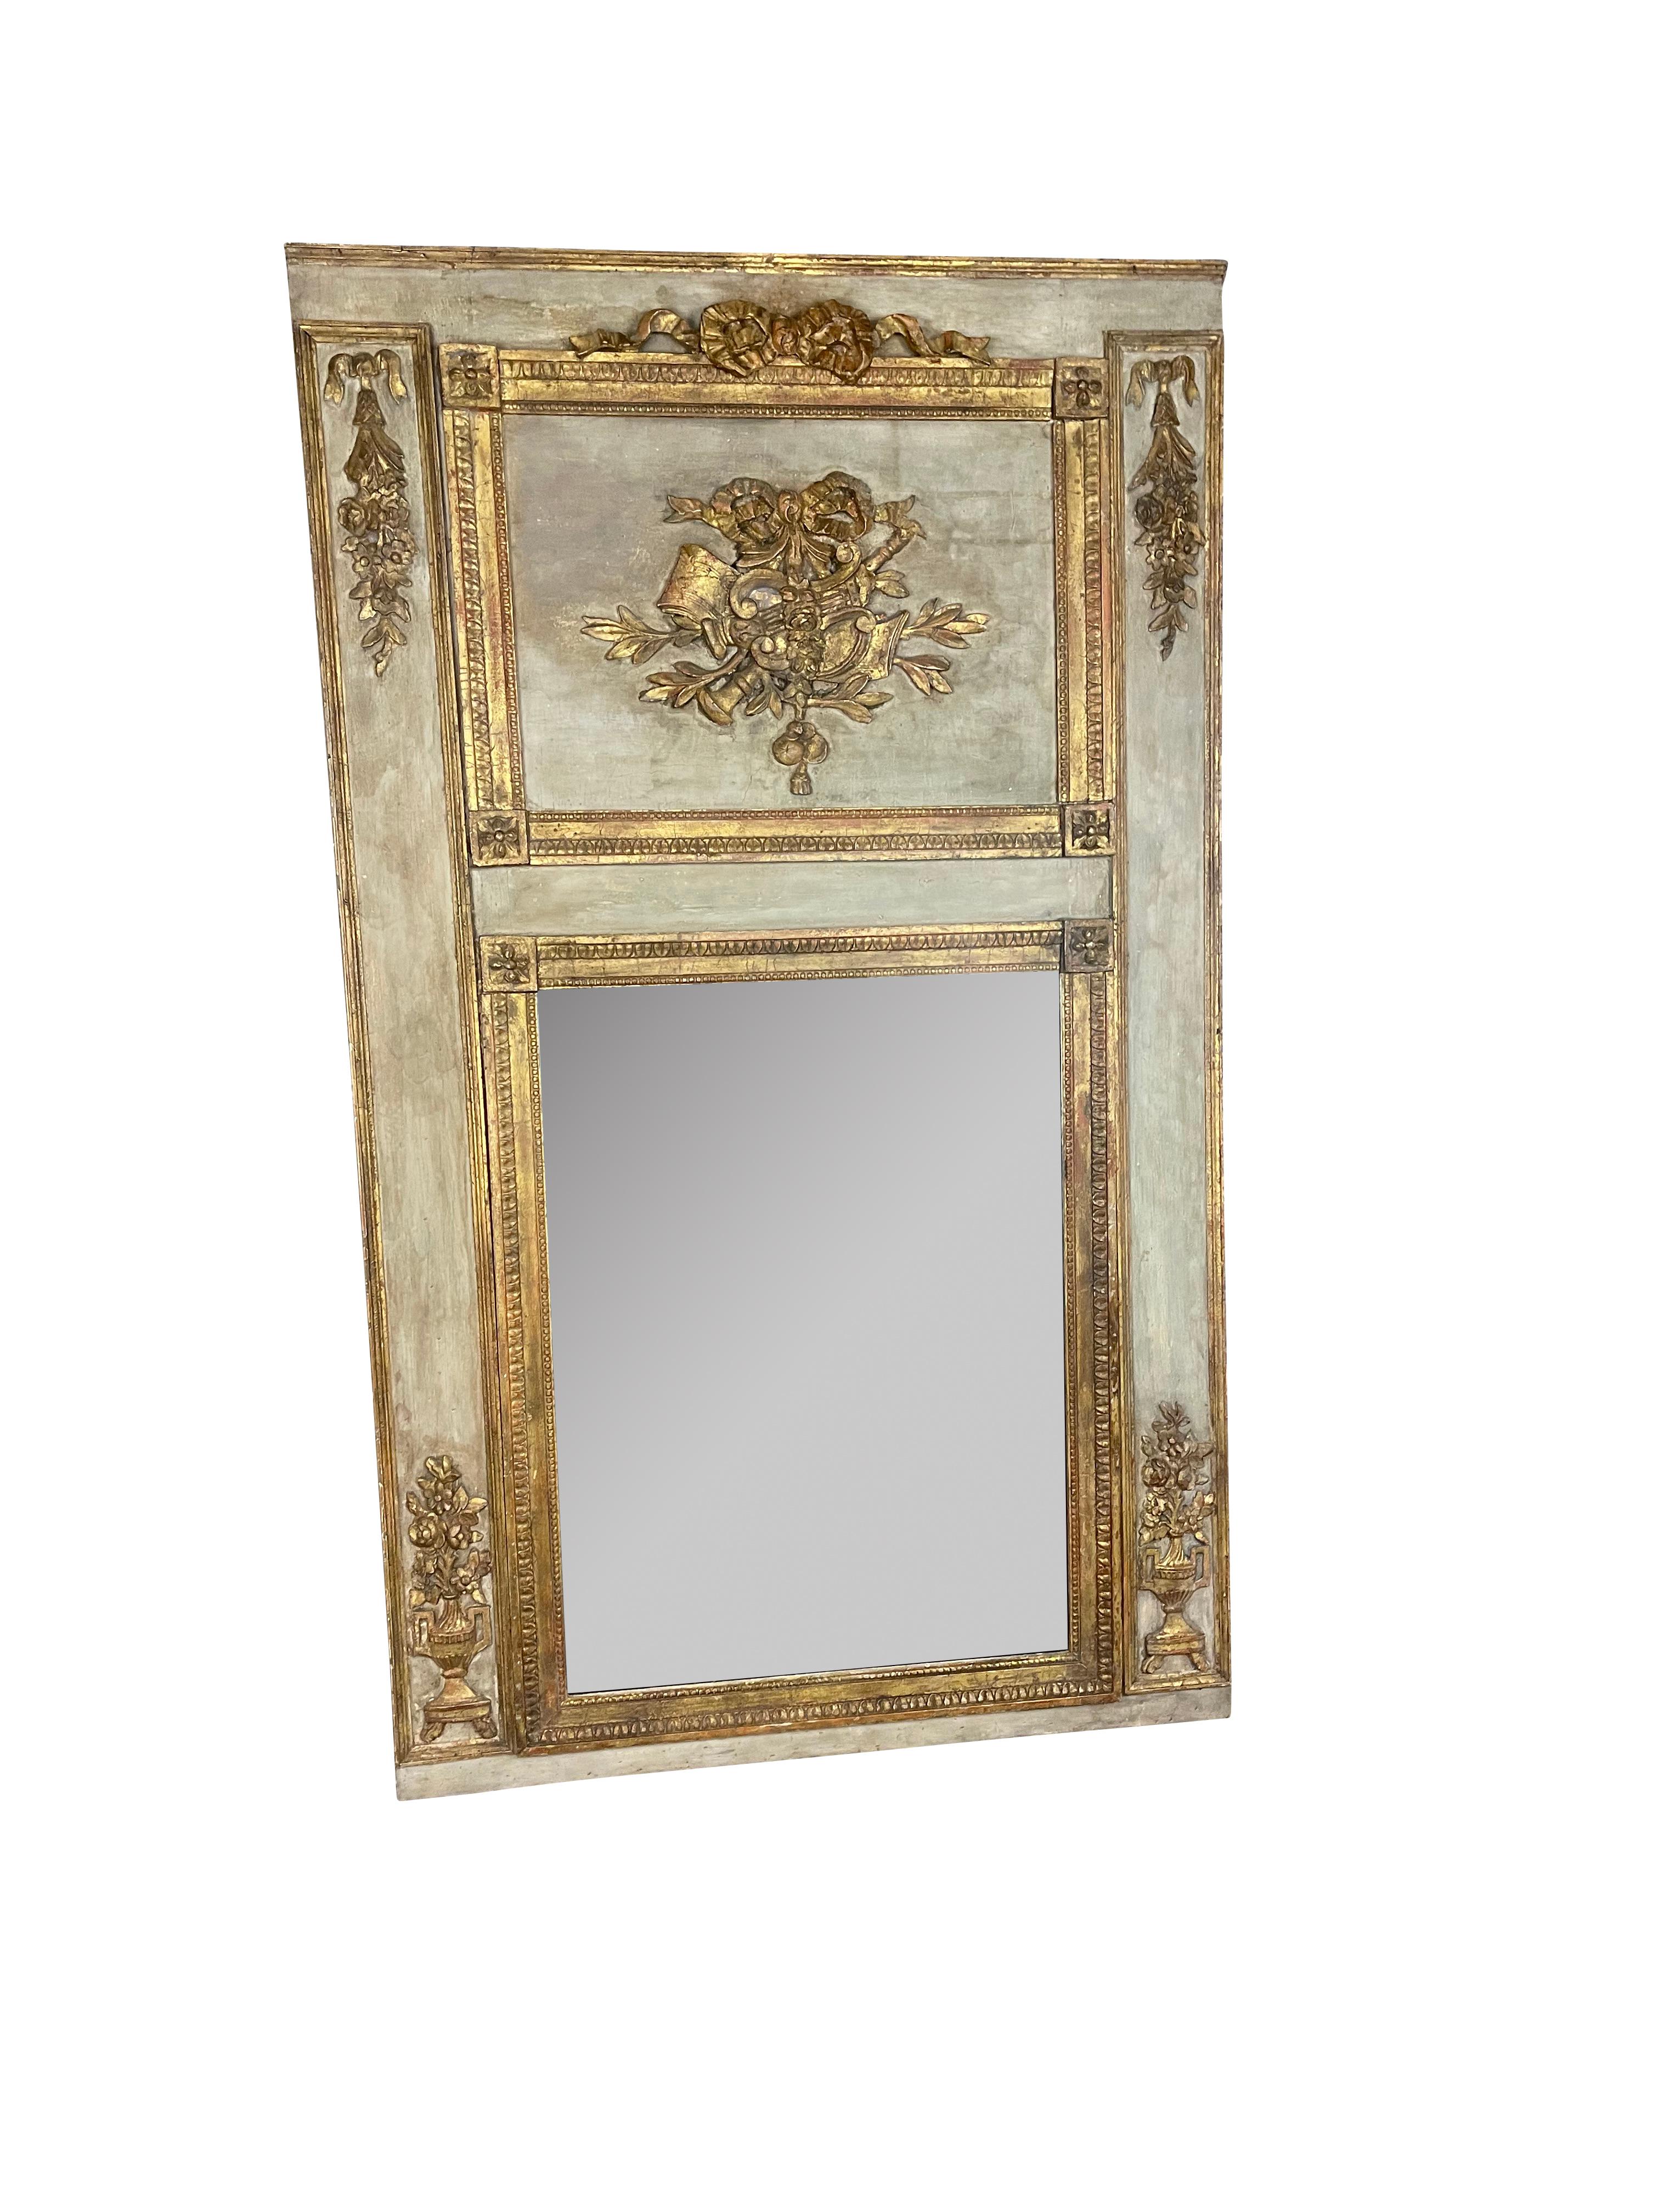 One of the most beautiful period Louis XVI Trumeau mirrors I have come across. A large French Louis XVI period painted trumeau mirror from the late 18th century, with carved giltwood flowers, garlands, and bows. Born in France during the reign of